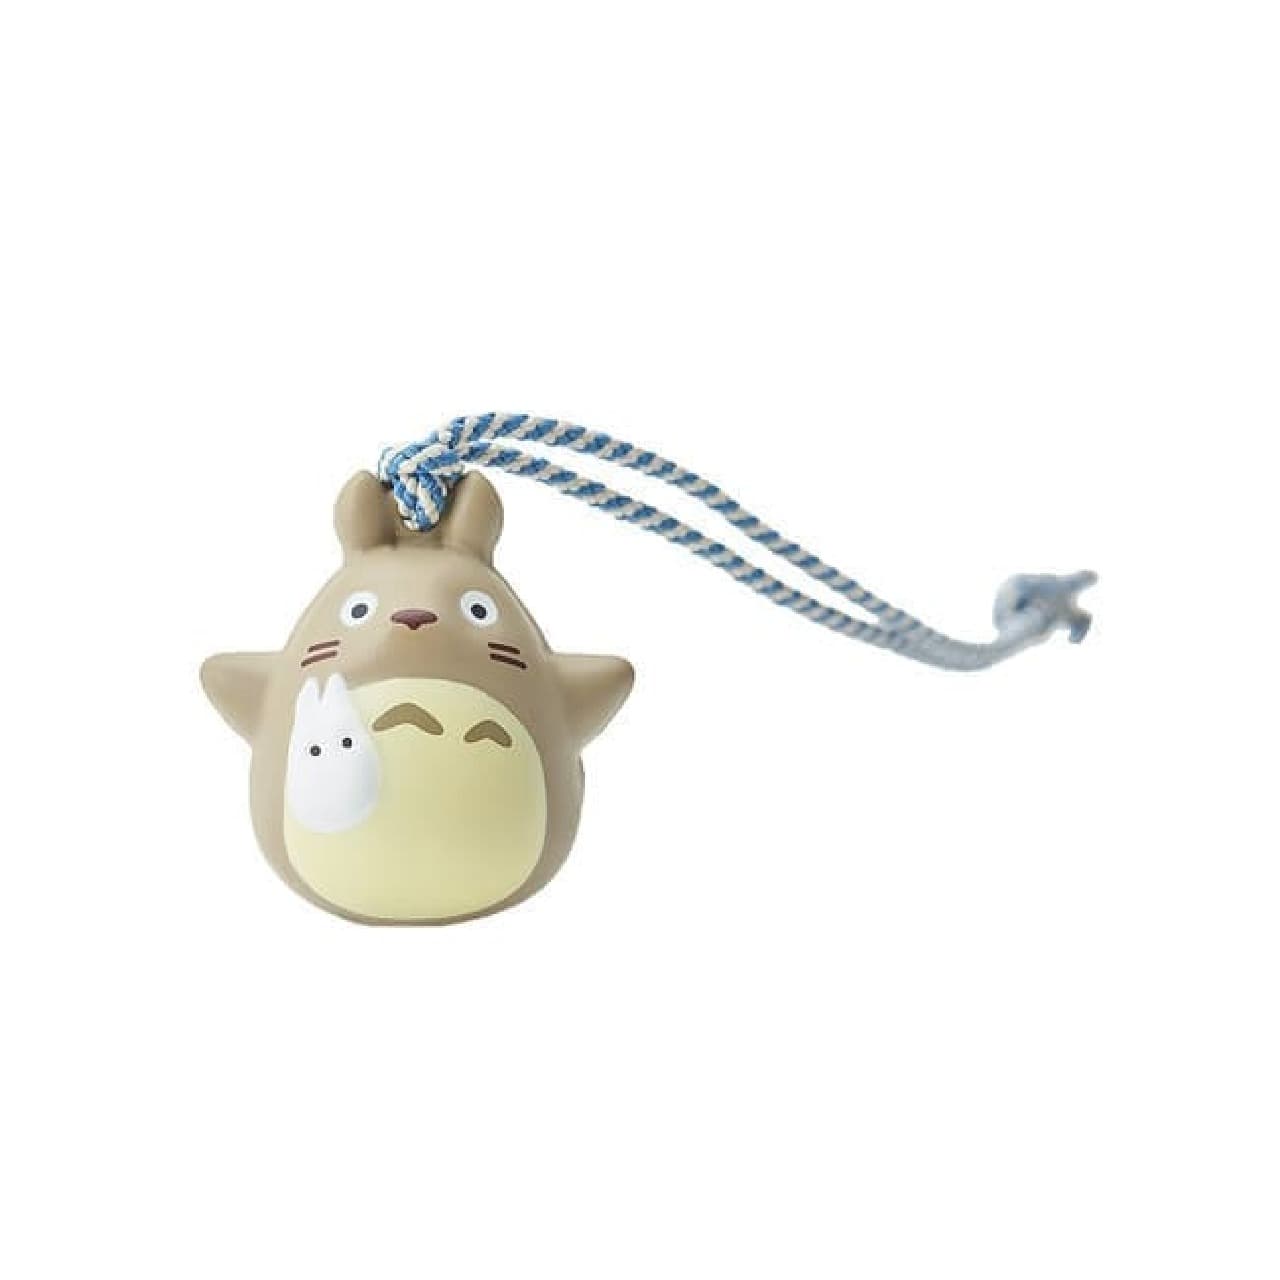 "Large Totoro Marche Eco Bag" at the post office --Small Totoro pouch with carabiner